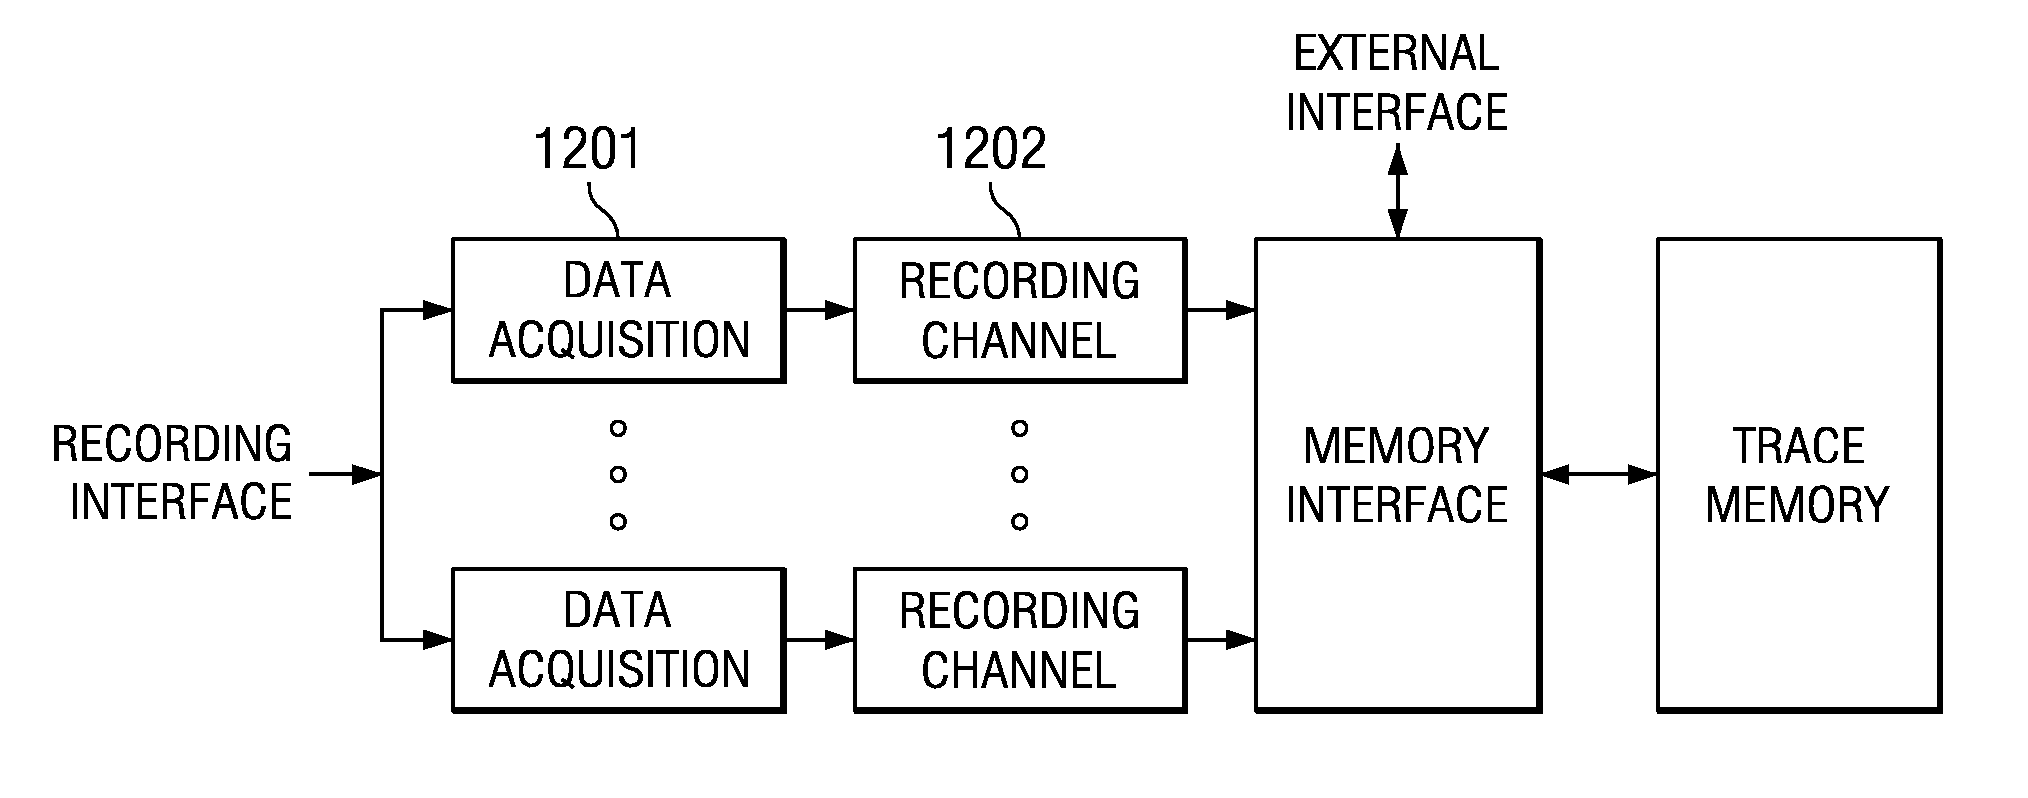 Recording Control Point in Trace Receivers